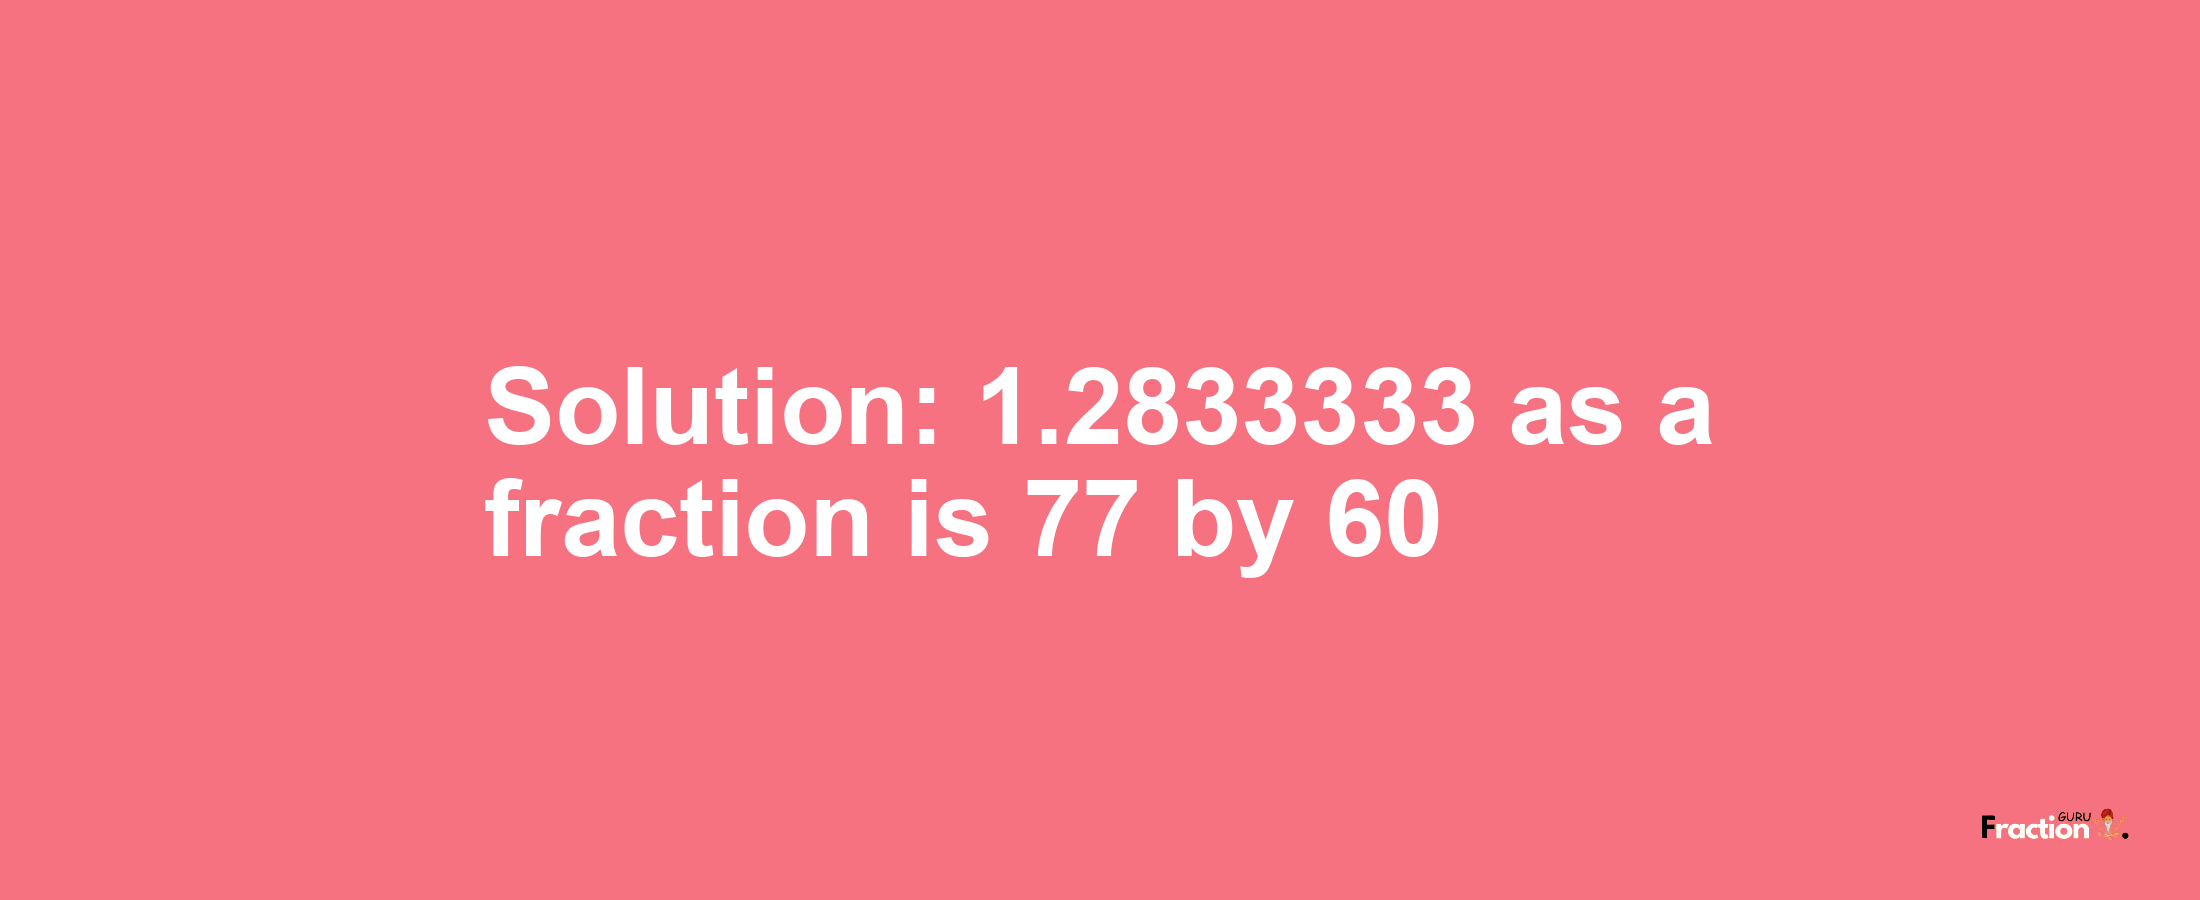 Solution:1.2833333 as a fraction is 77/60